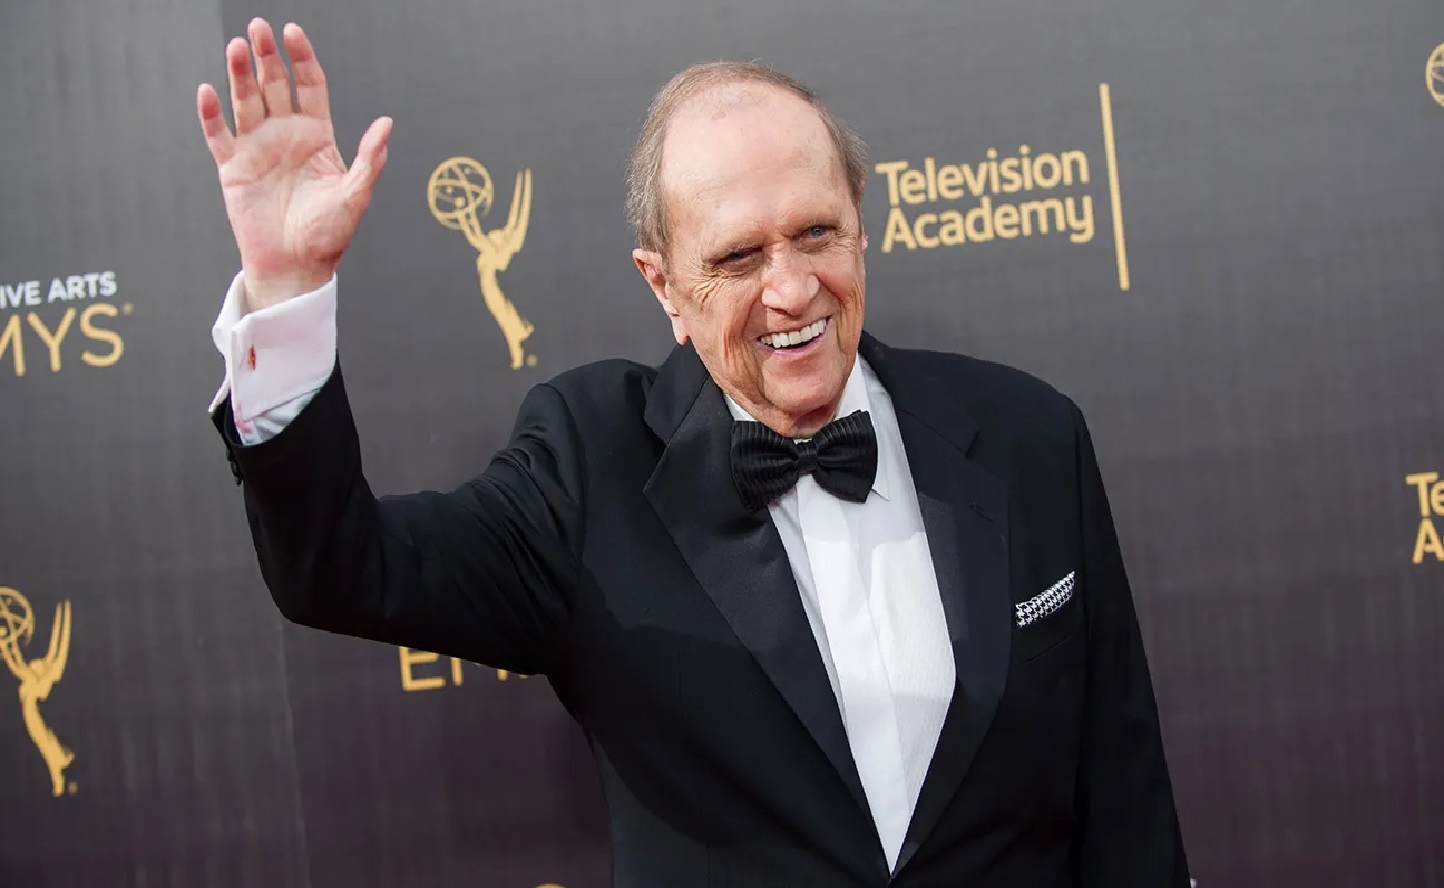 Beloved Comedian and Sitcom Legend Bob Newhart Passes Away at 94 - Adela Journal - News from around the World